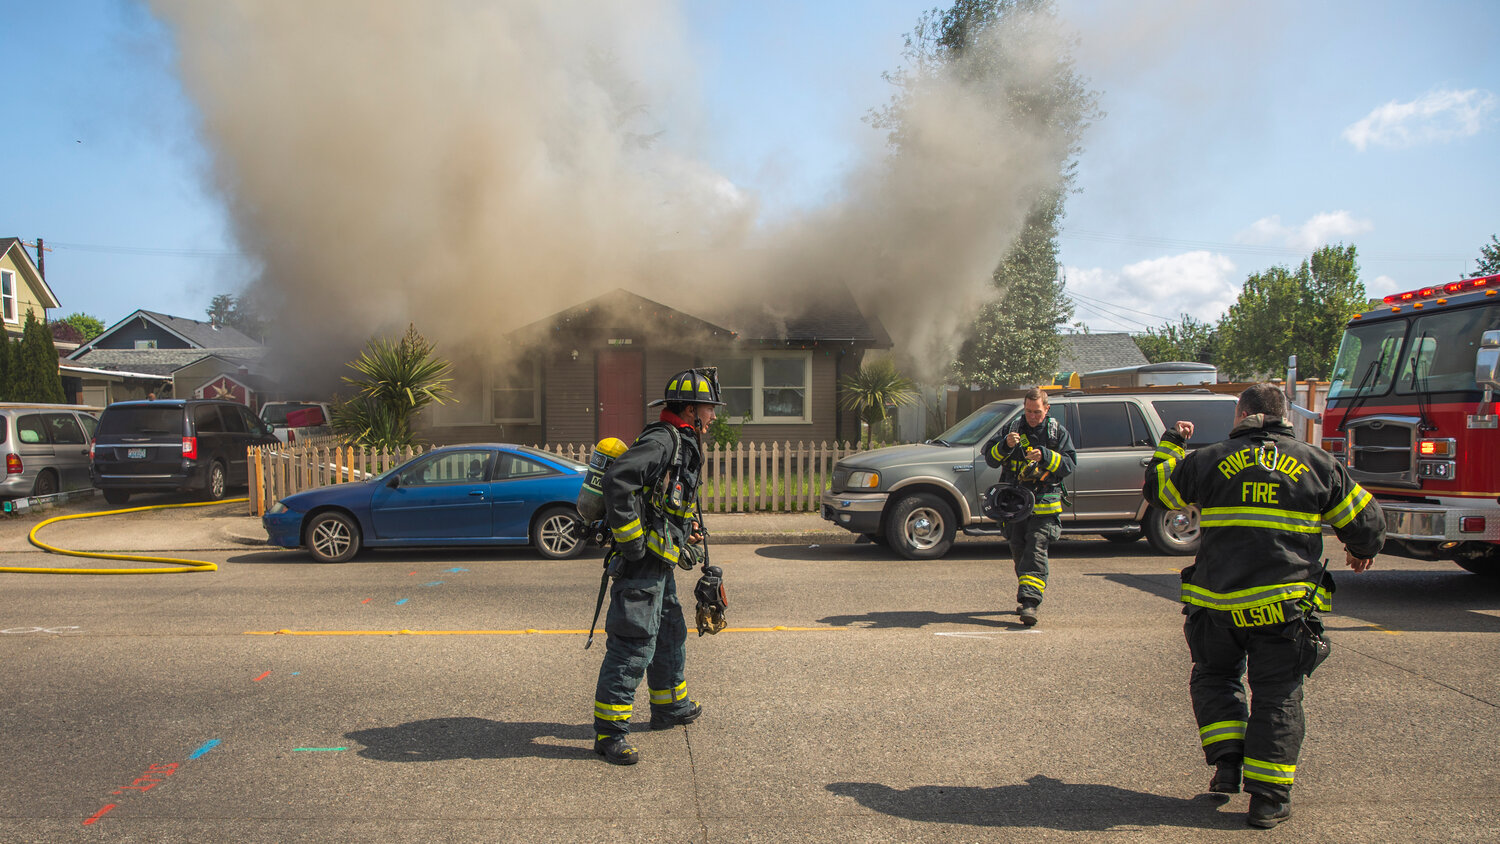 First responders from Riverside Fire Authority arrive on scene as a column of smoke rises from a residence in the 800 block of Centralia College Blvd. on Wednesday, May 24.